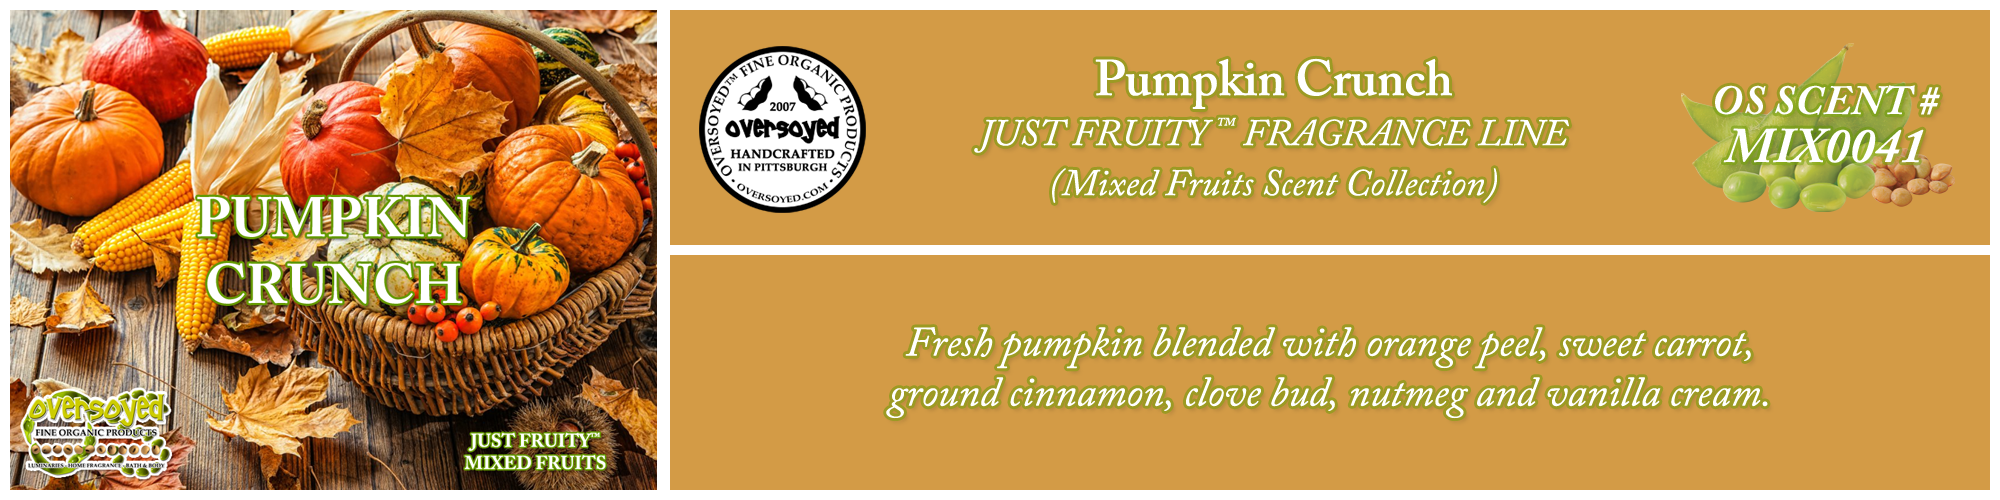 Pumpkin Crunch Handcrafted Products Collection